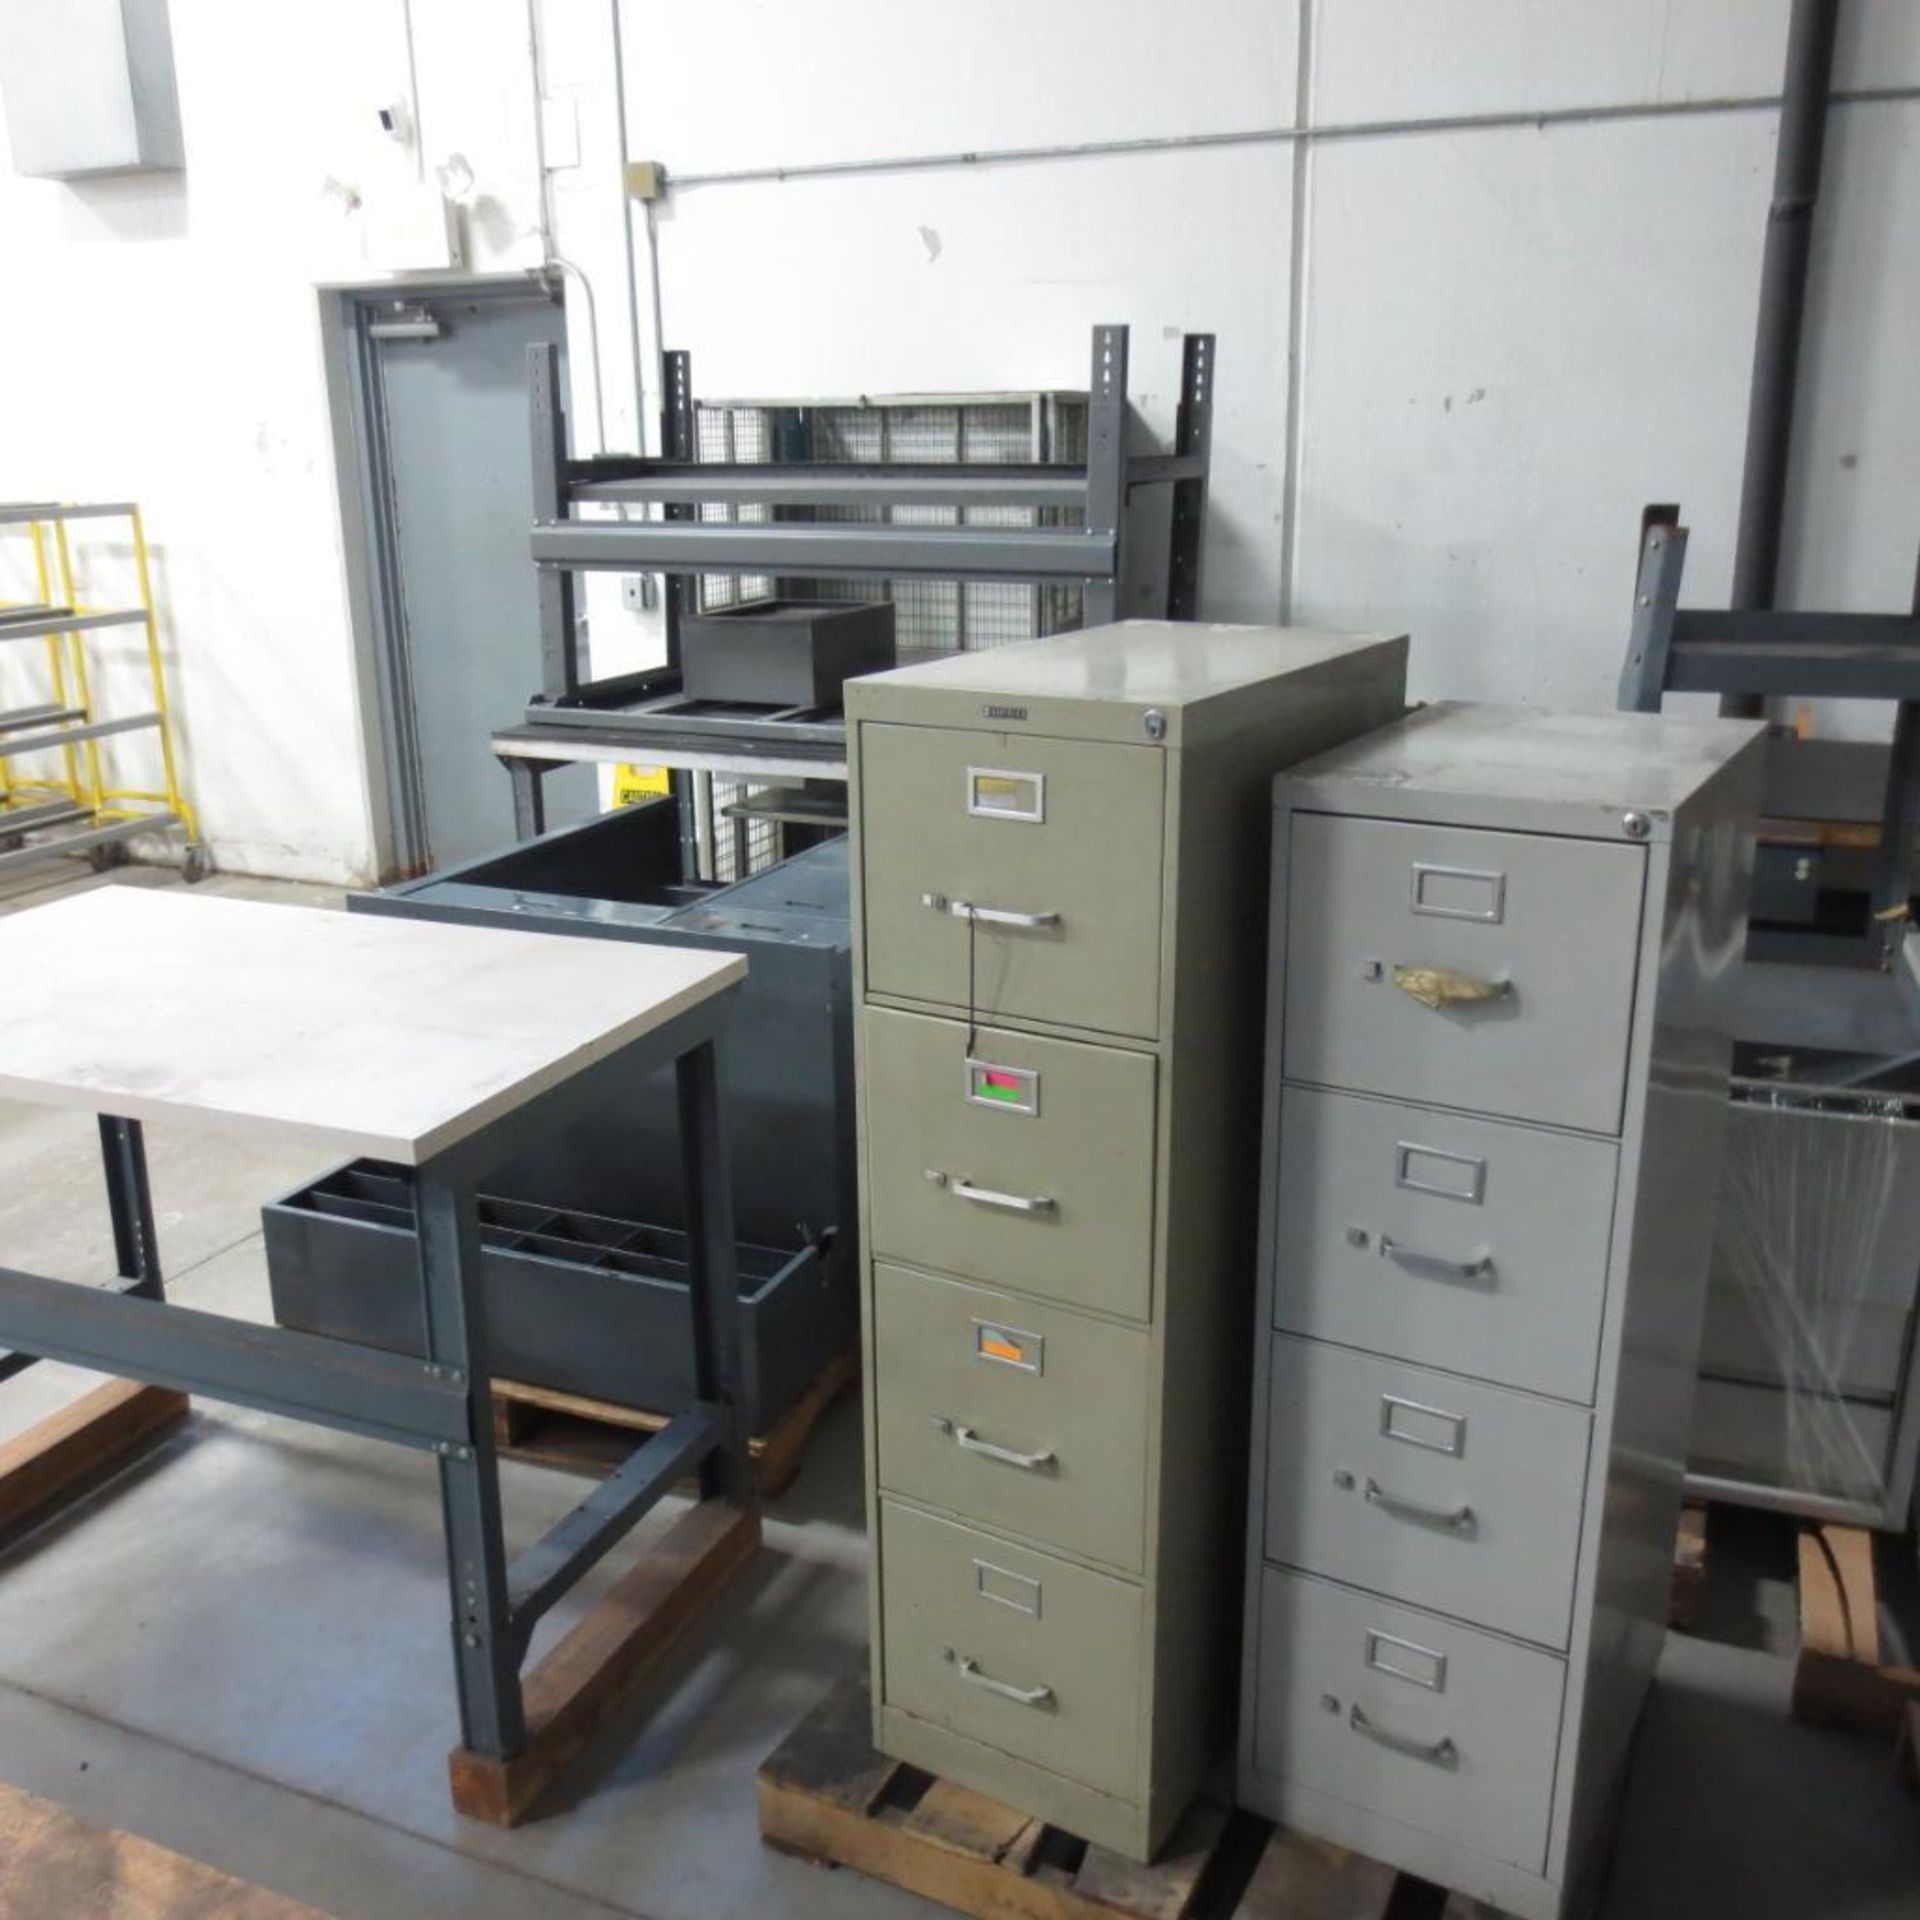 Work Benches, File Cabinets and Shelf.**Lot located at 651 N Dekora Woods Blvd., Saukville, WI 53080 - Image 7 of 7